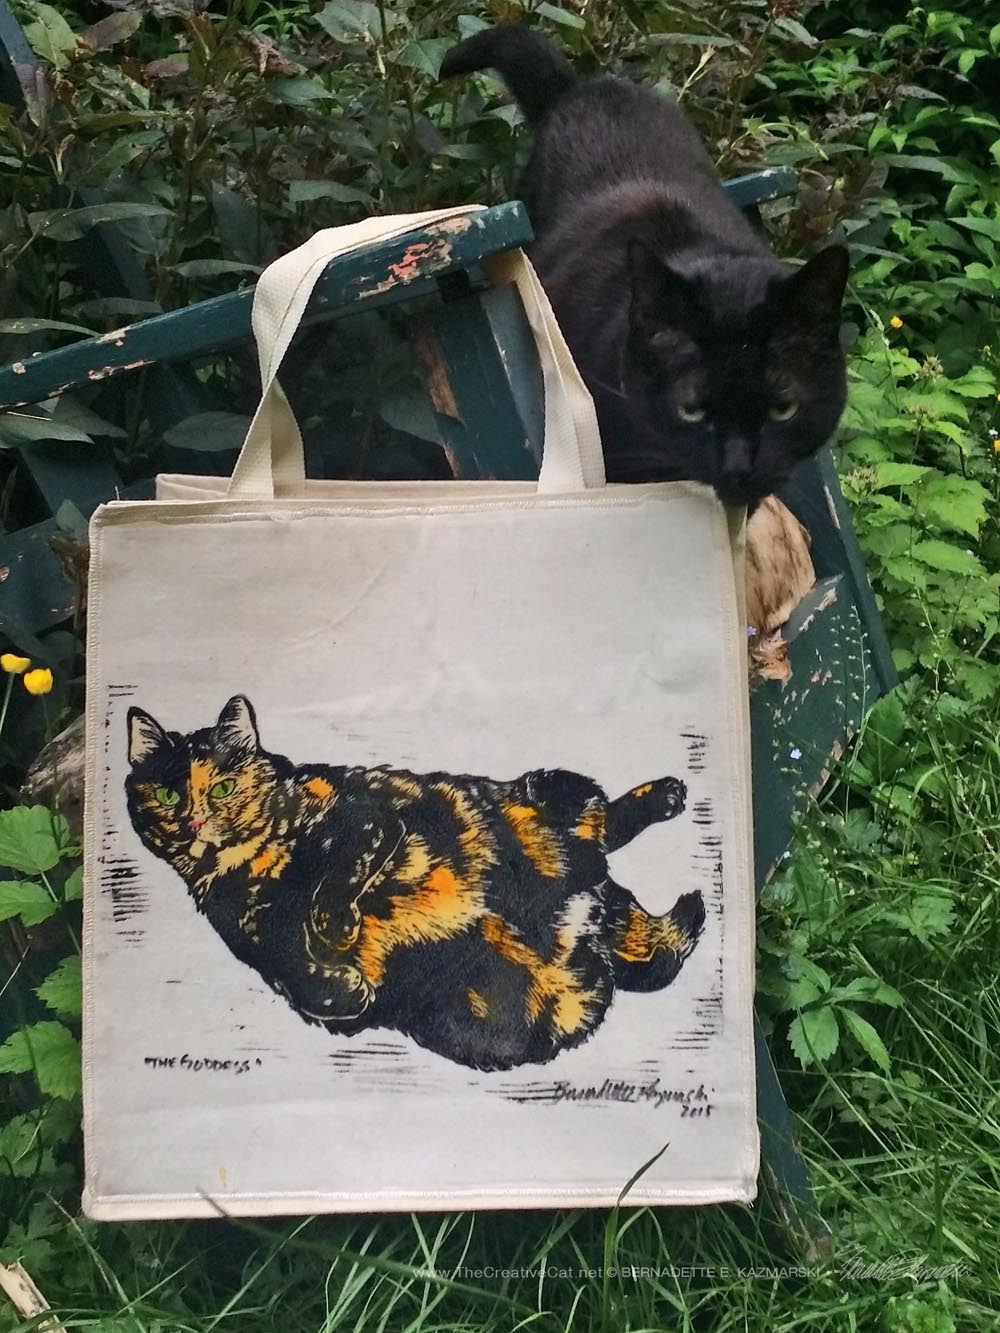 The Goddess tote bag--and you know how Mimi loves to photobomb my product photography.